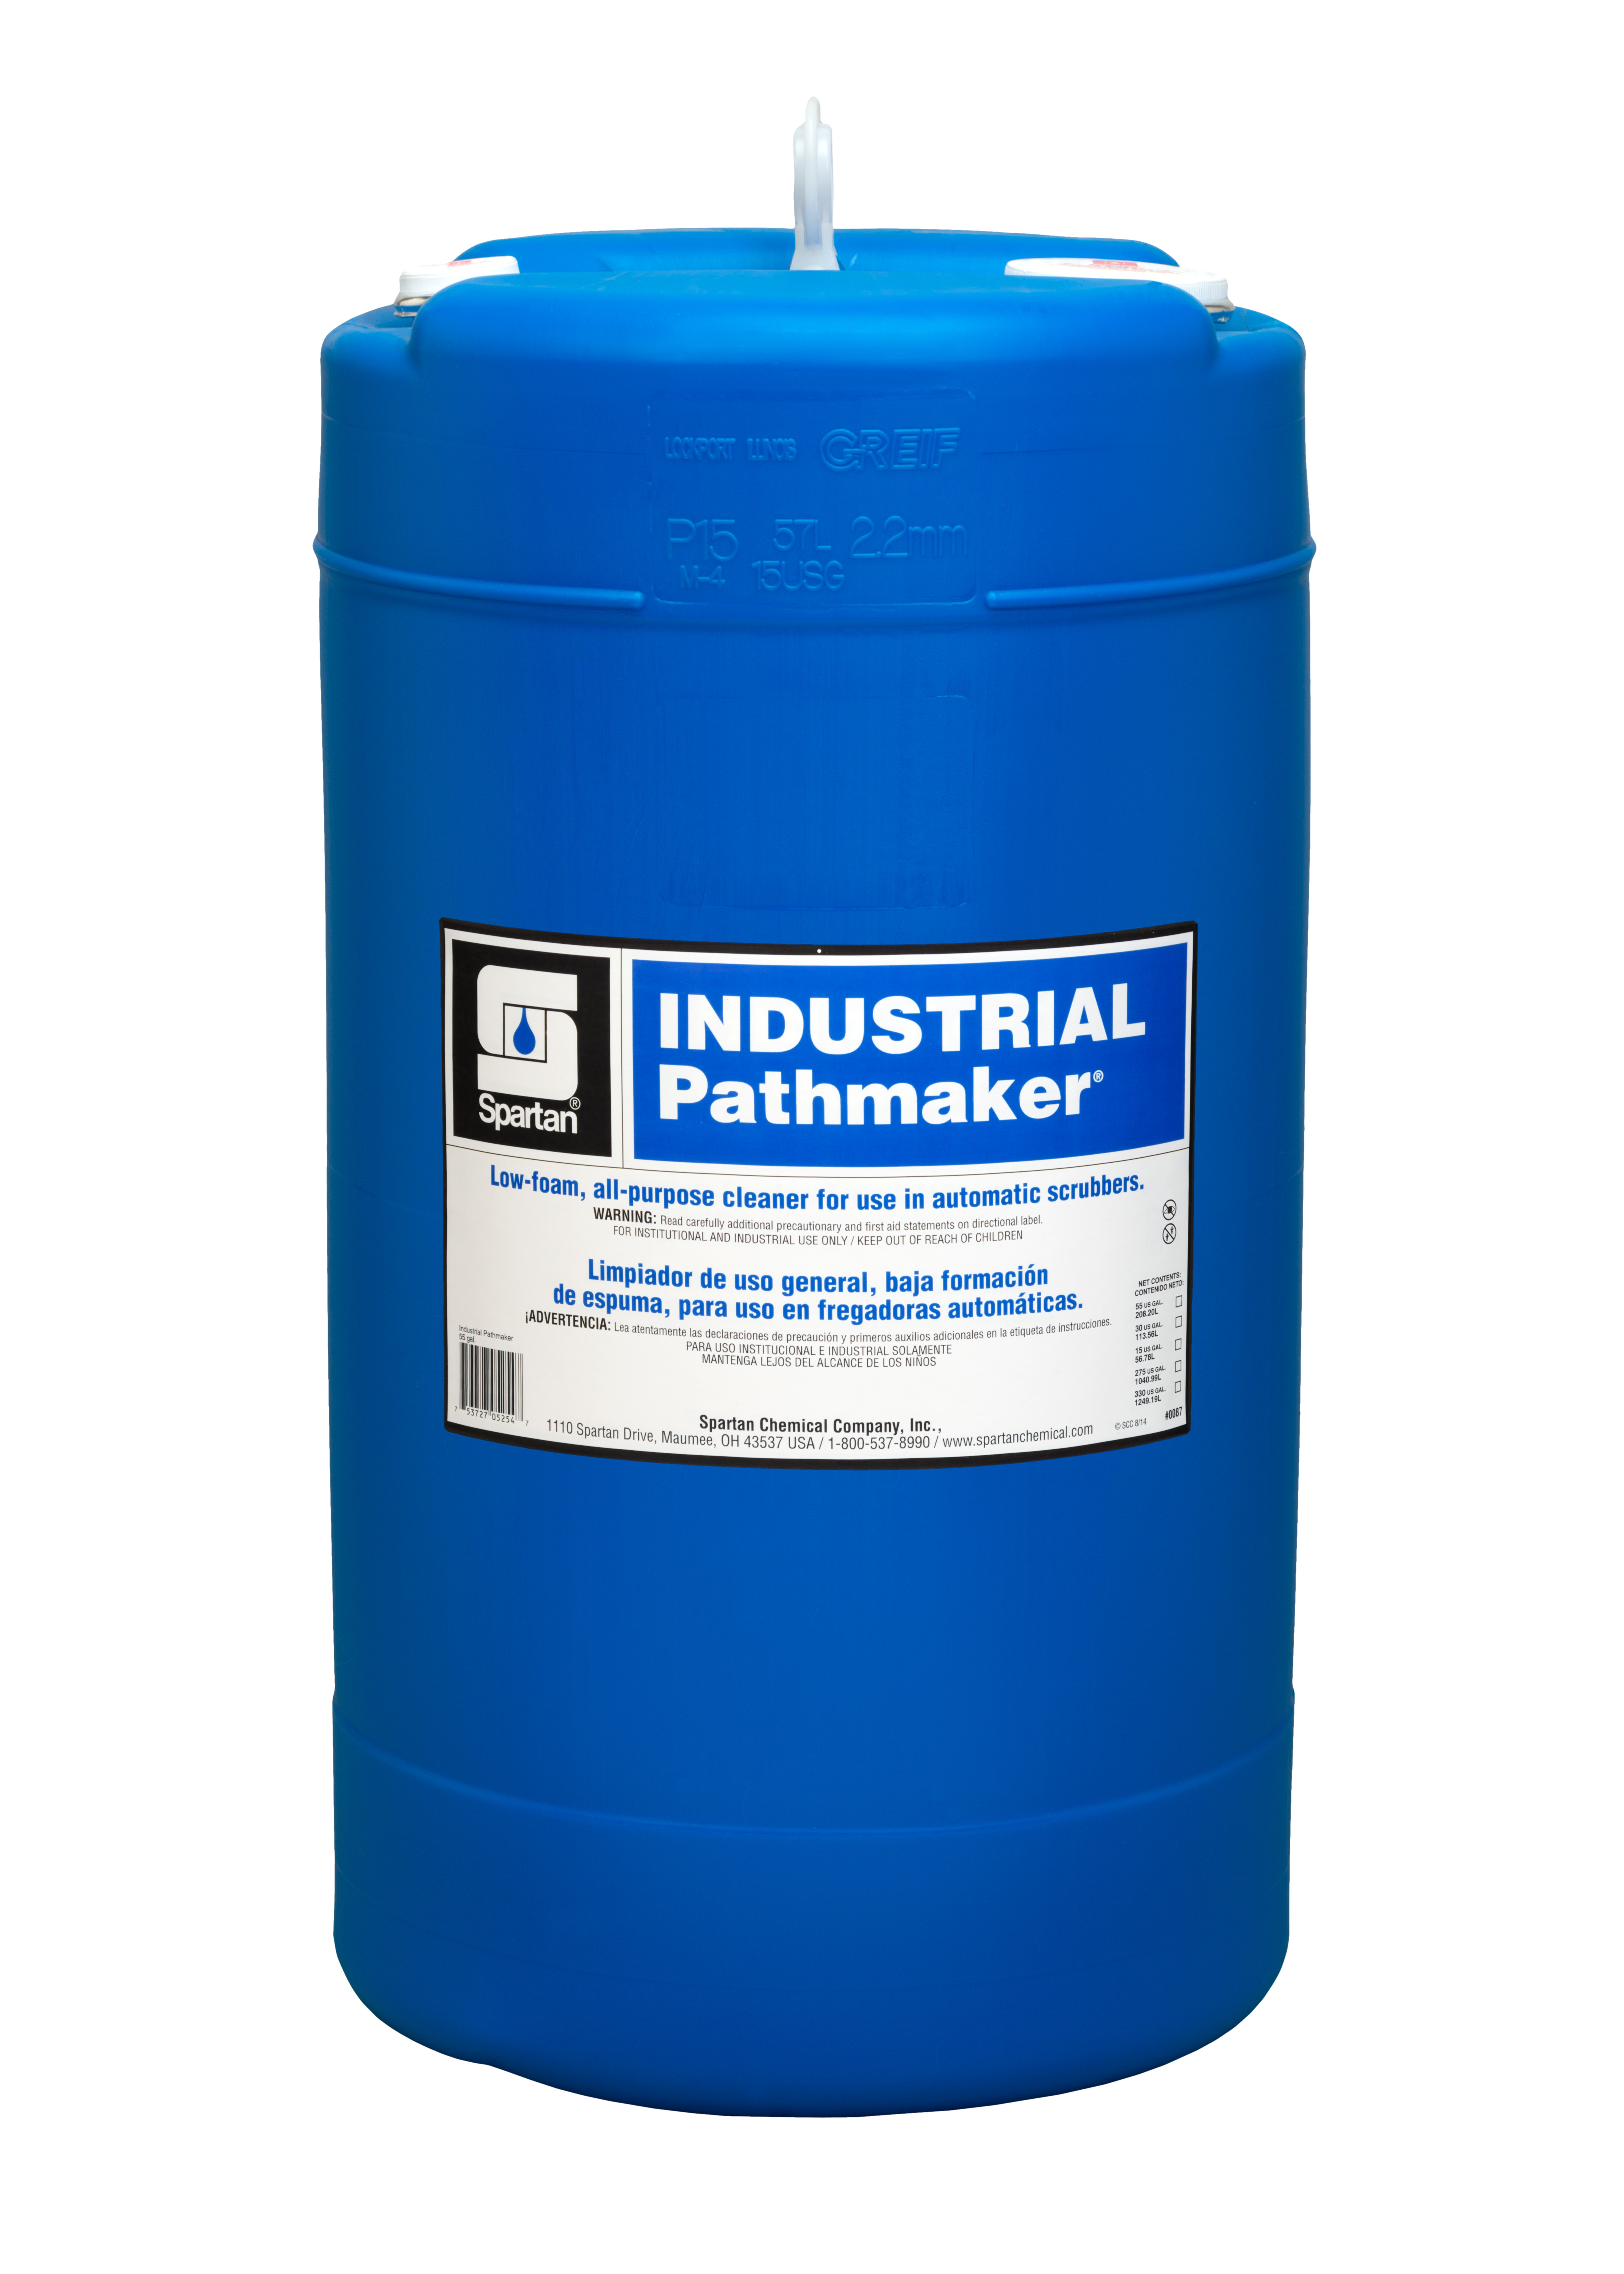 Spartan Chemical Company Industrial Pathmaker, 15 GAL DRUM